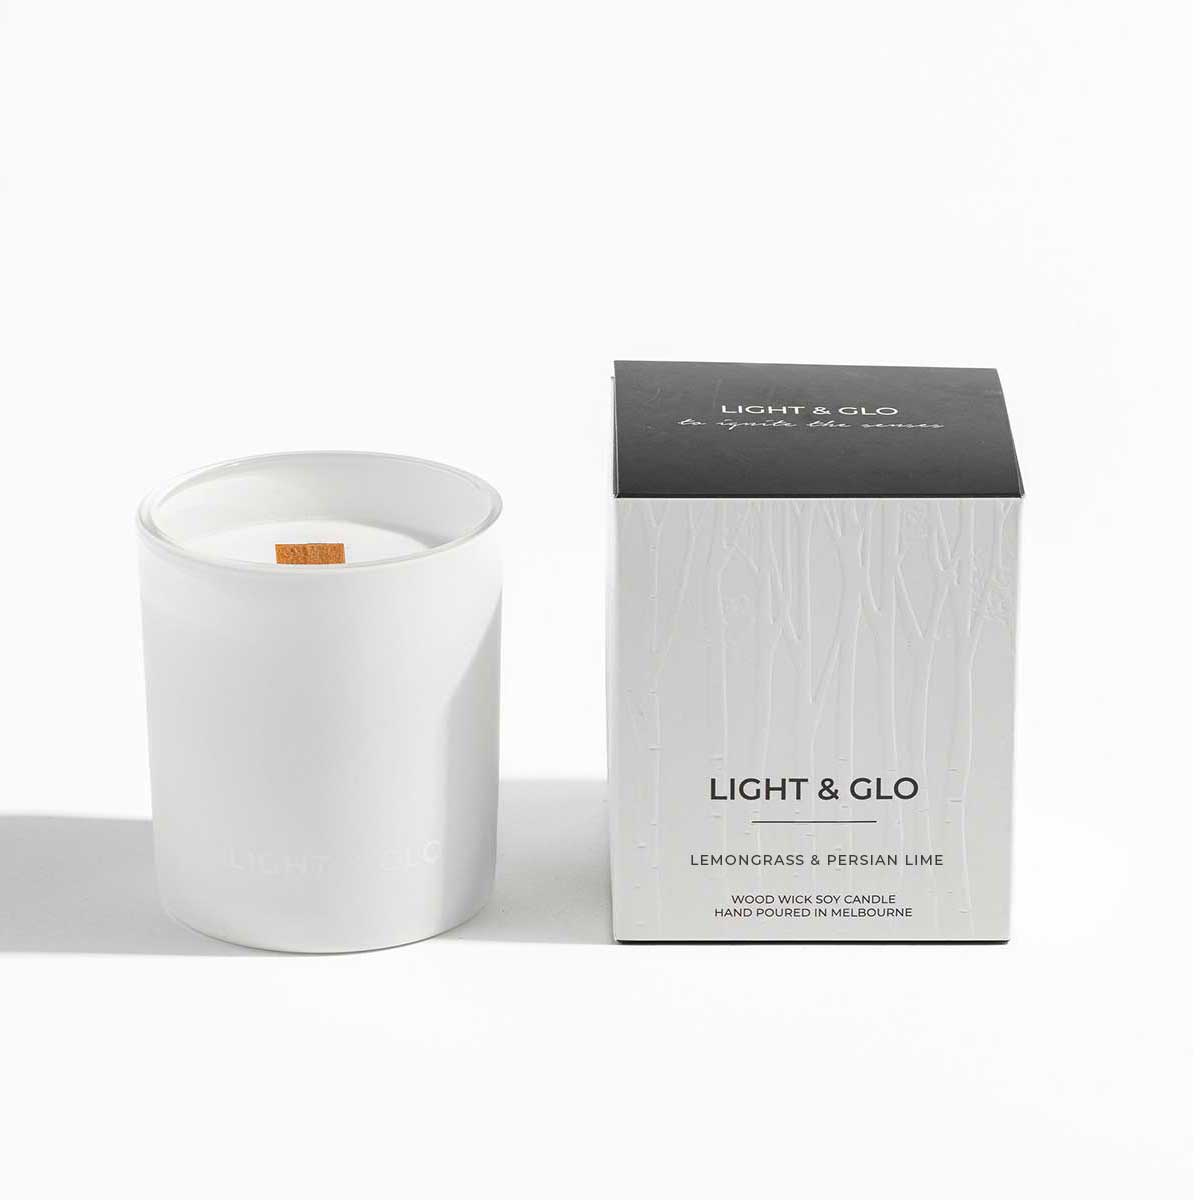 Lemongrass &amp; Persian Lime - Monochrome Large 300g Candle | Luxury Candles &amp; Home Fragrances by Light + Glo